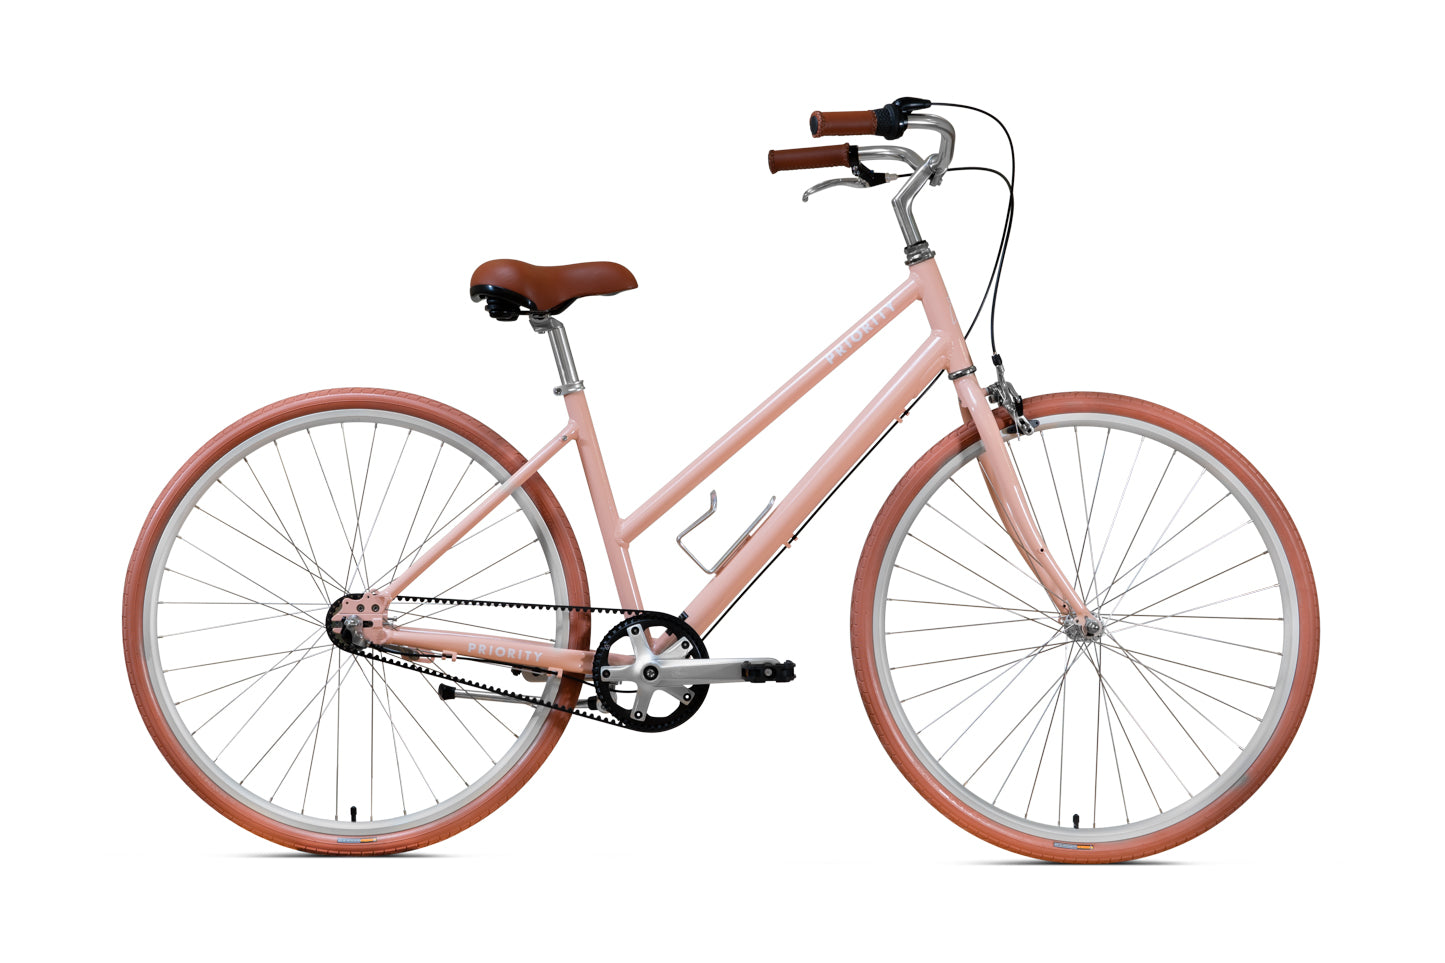 Blush Priority Classic Plus step-through comfort bike with brown tires, saddle, and grips